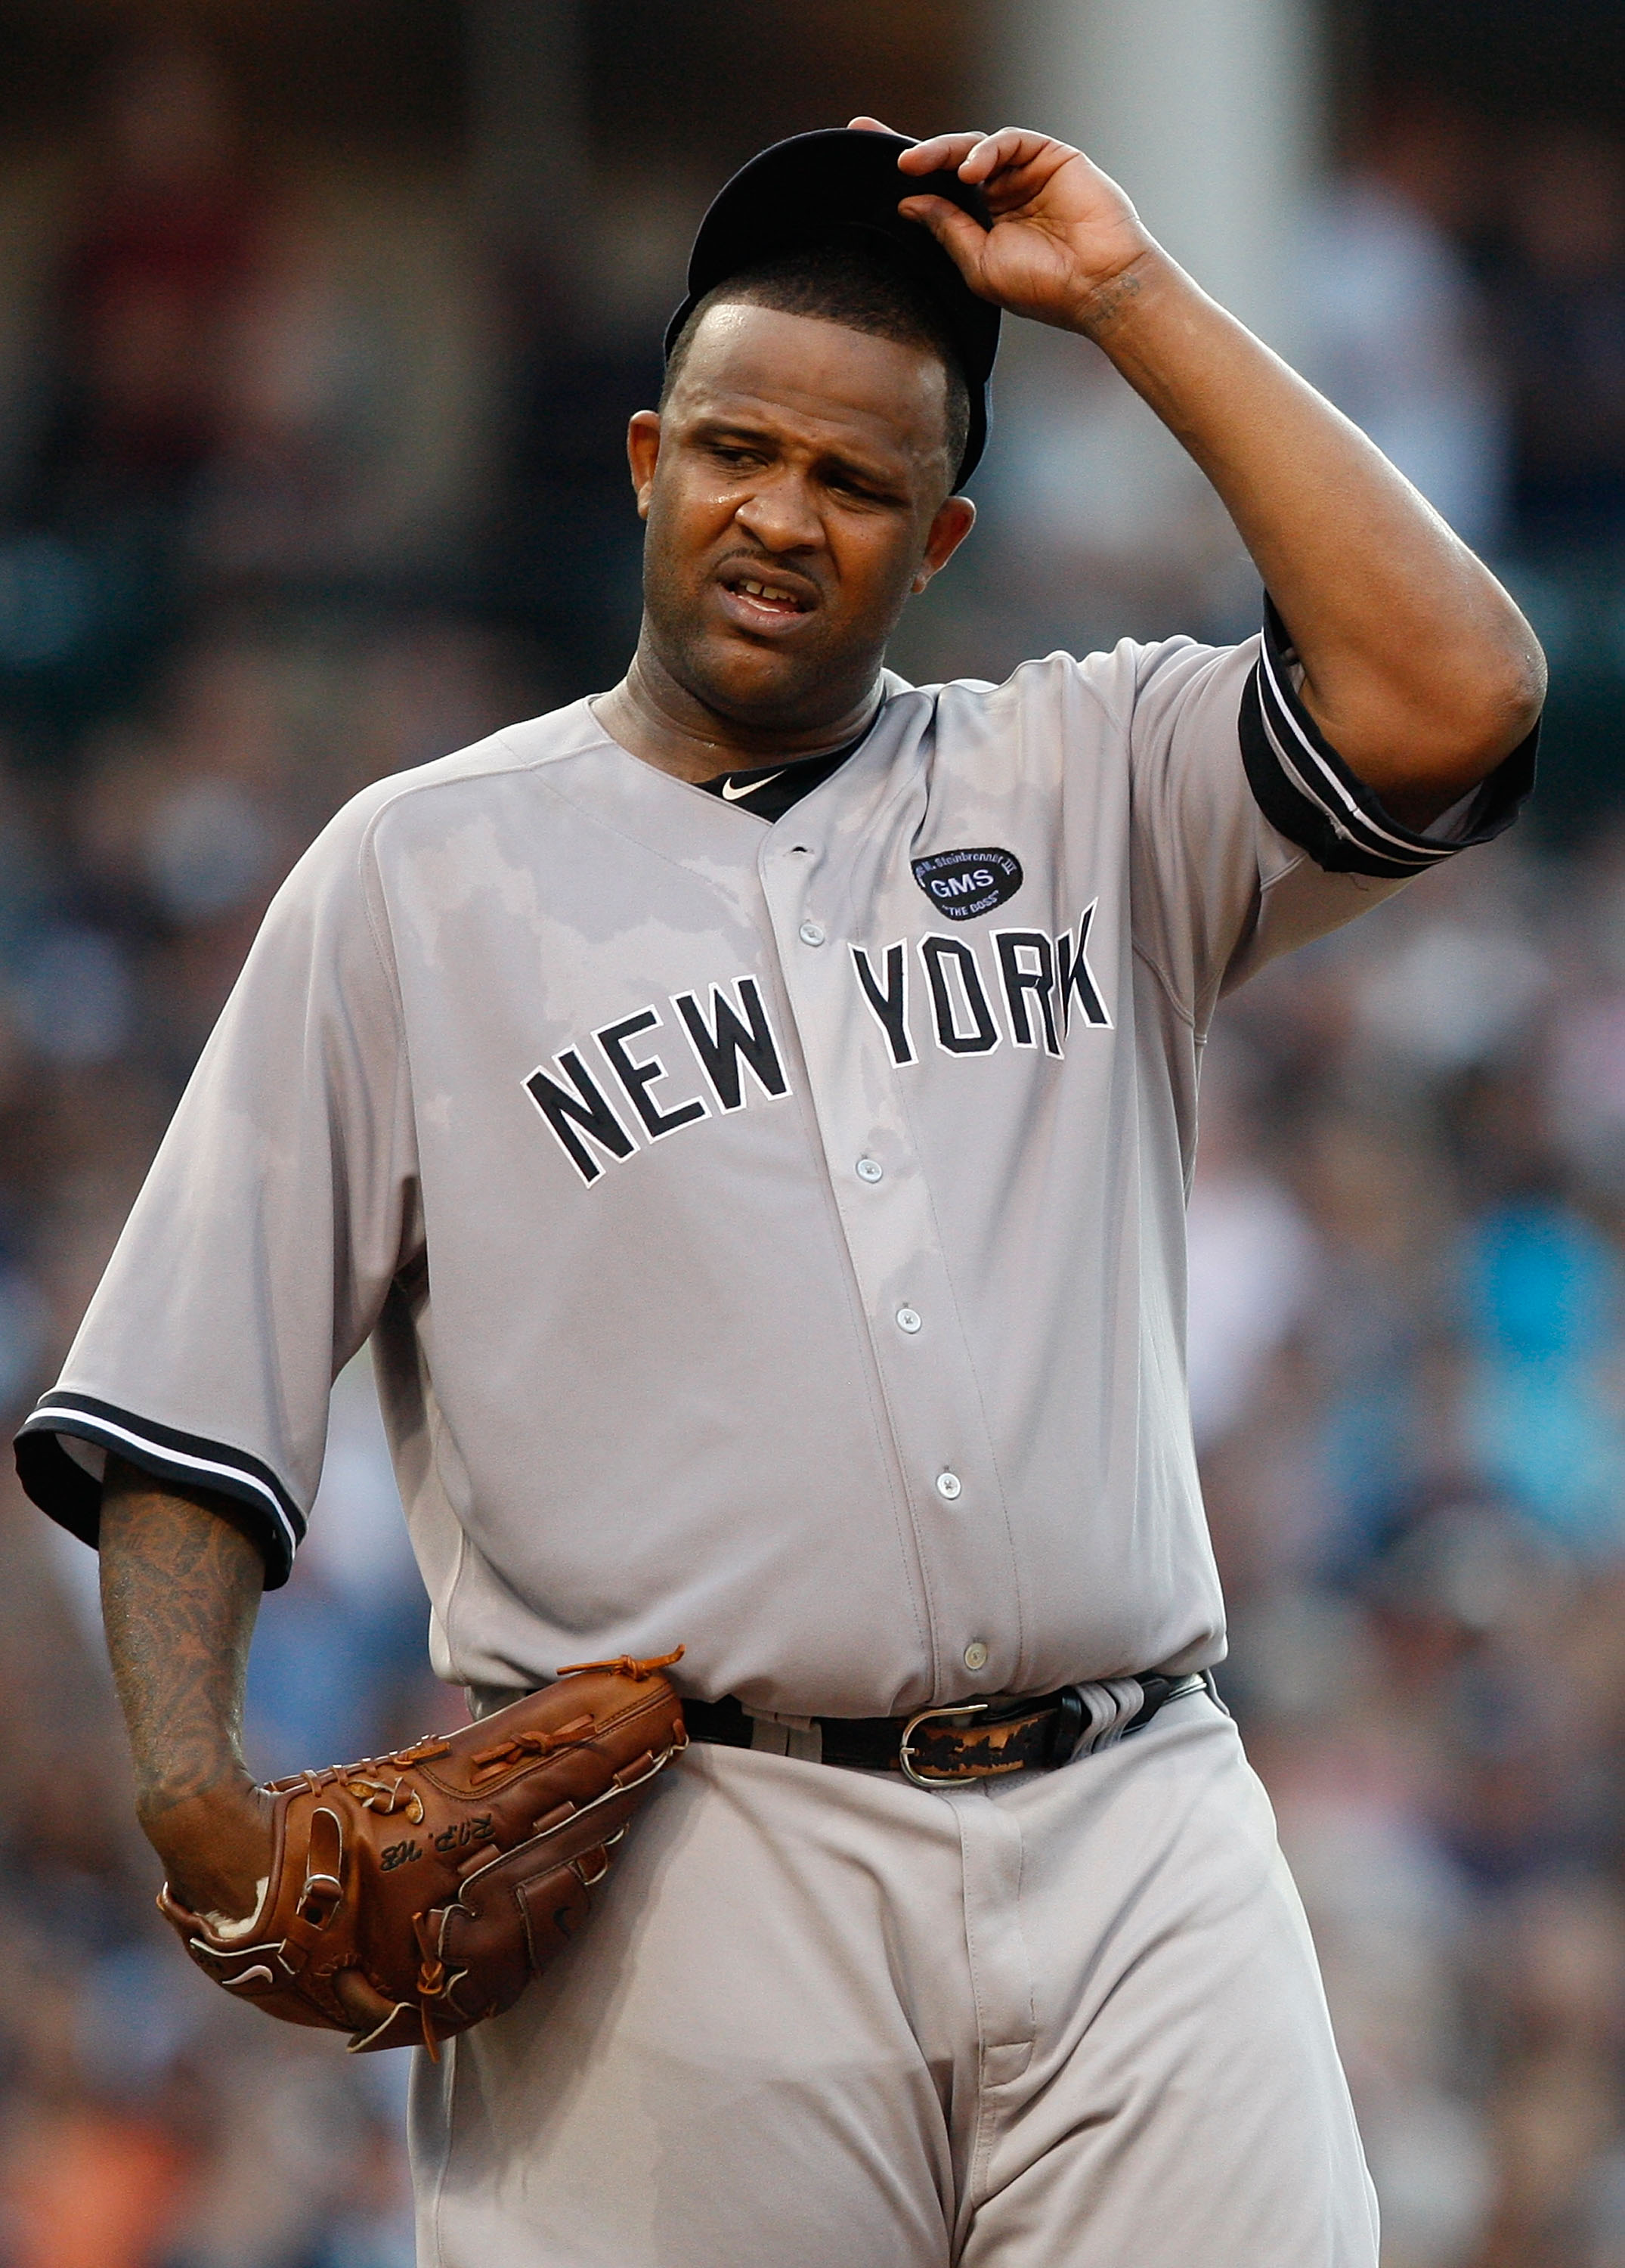 CLEVELAND - JULY 27:  CC Sabathia #52 of the New York Yankees takes a moment inbetween pitches during the game against the Cleveland Indians on July 27, 2010 at Progressive Field in Cleveland, Ohio.  (Photo by Jared Wickerham/Getty Images)